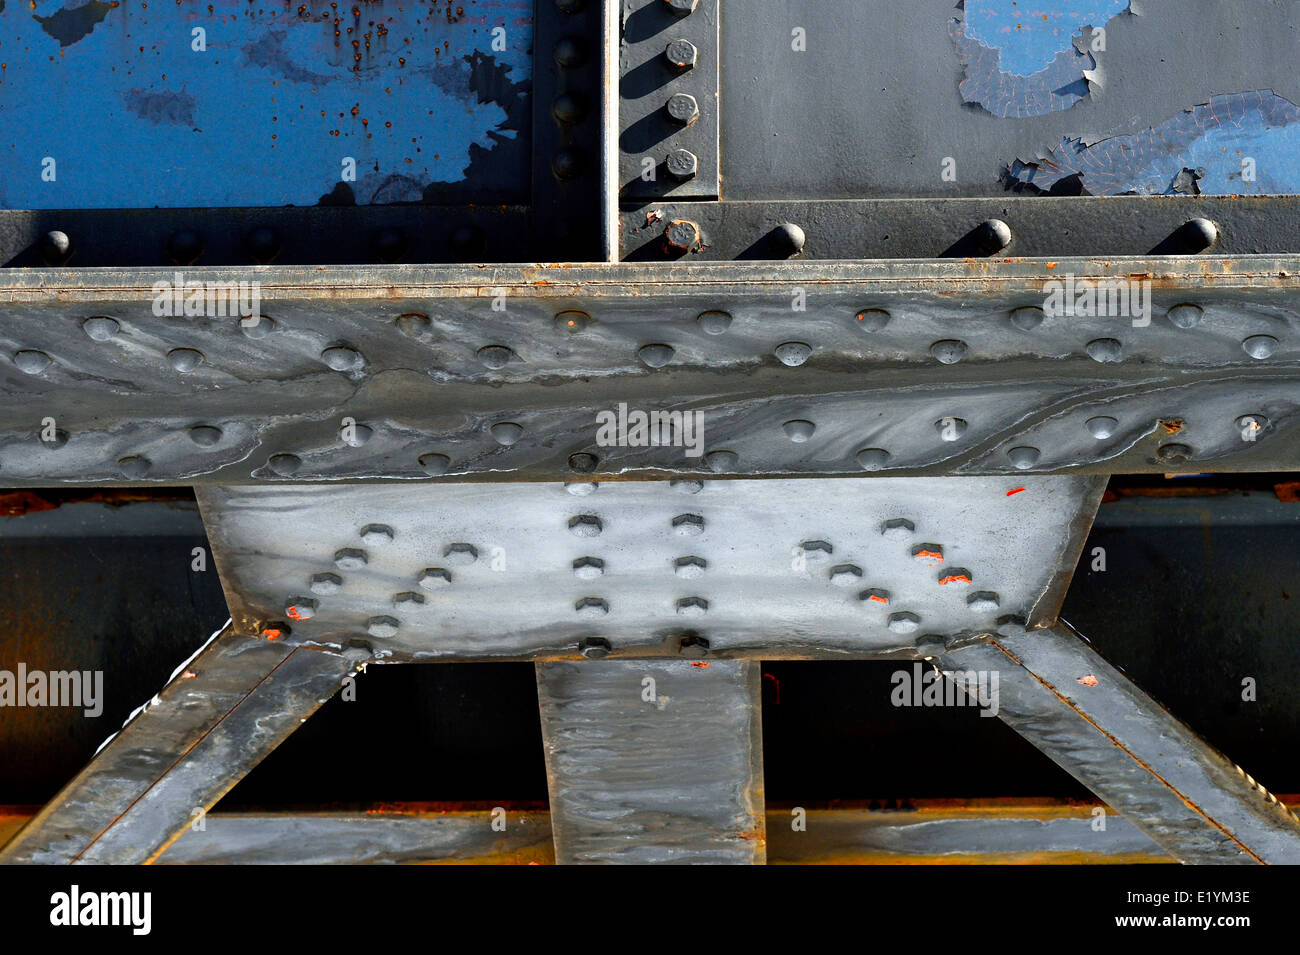 Steel girders bolted together to make the foundation of a train bridge Stock Photo